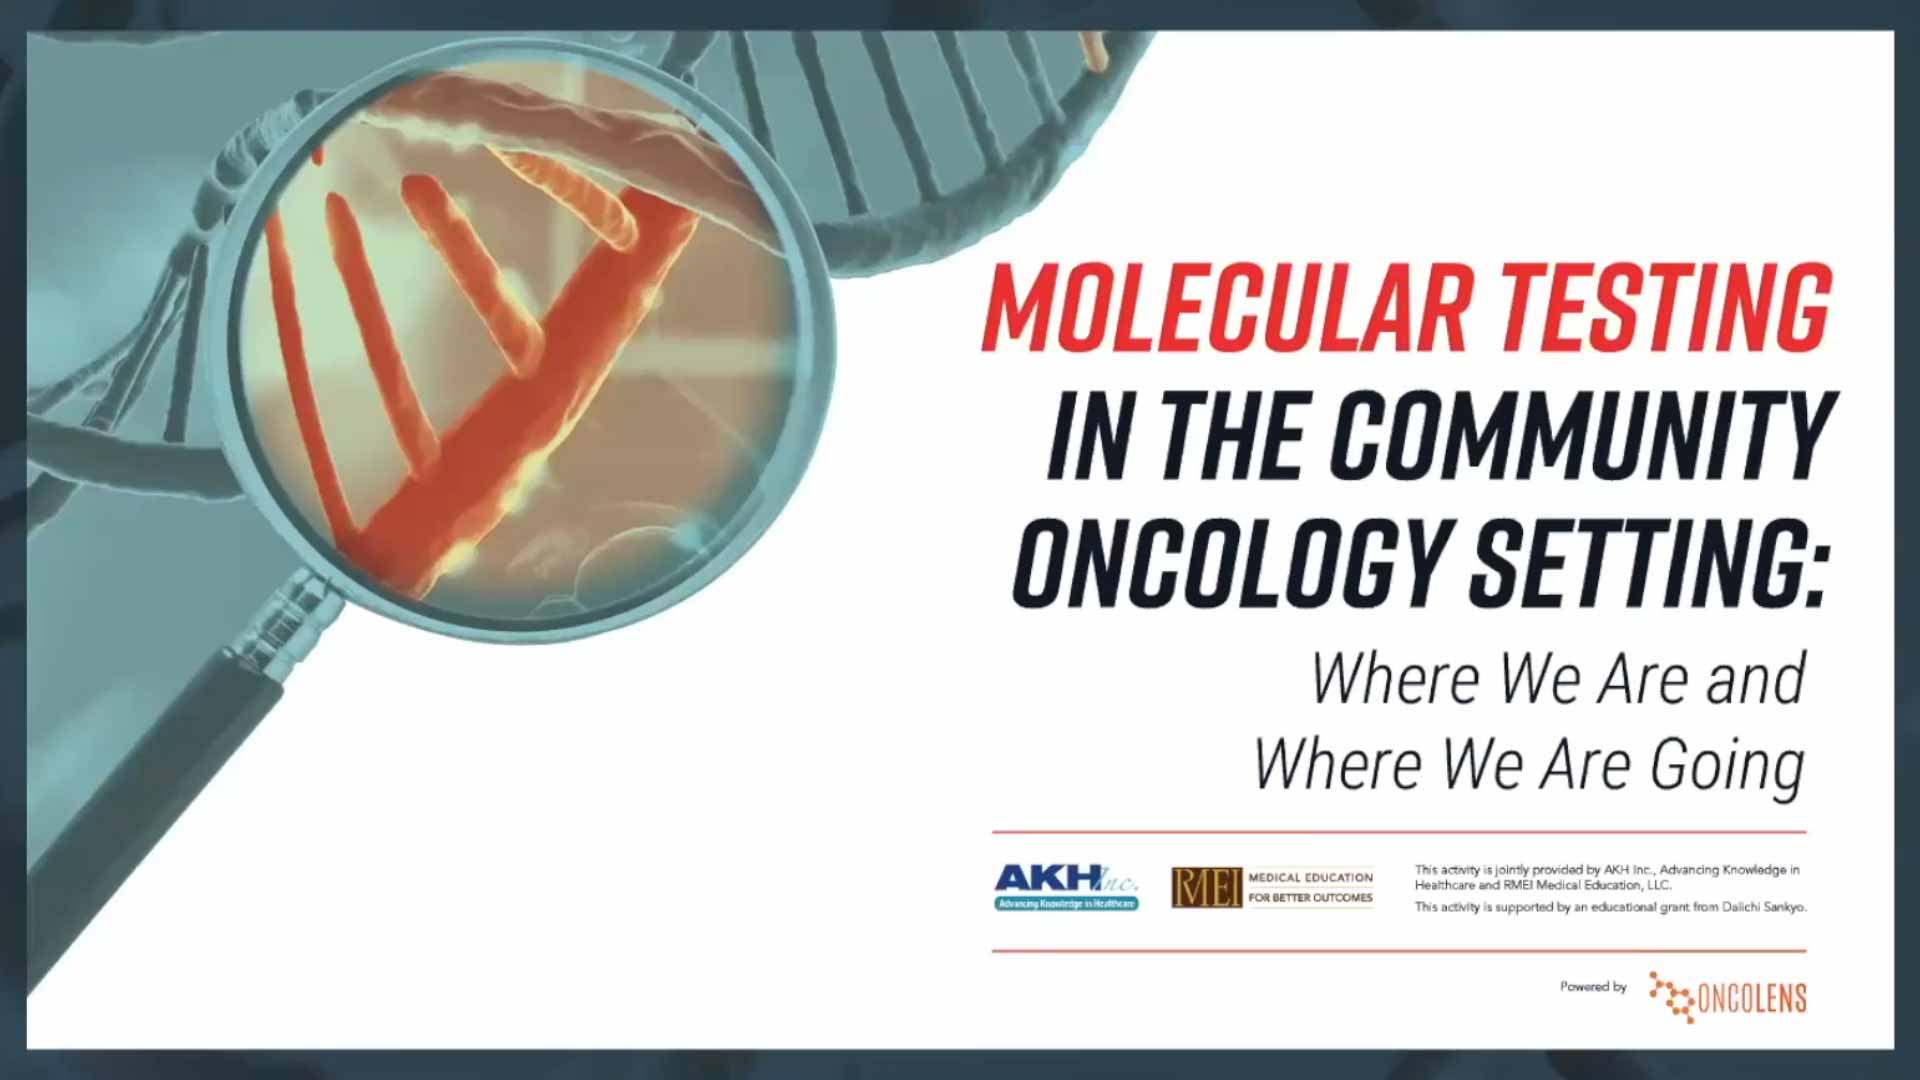 Molecular testing in the community oncology setting